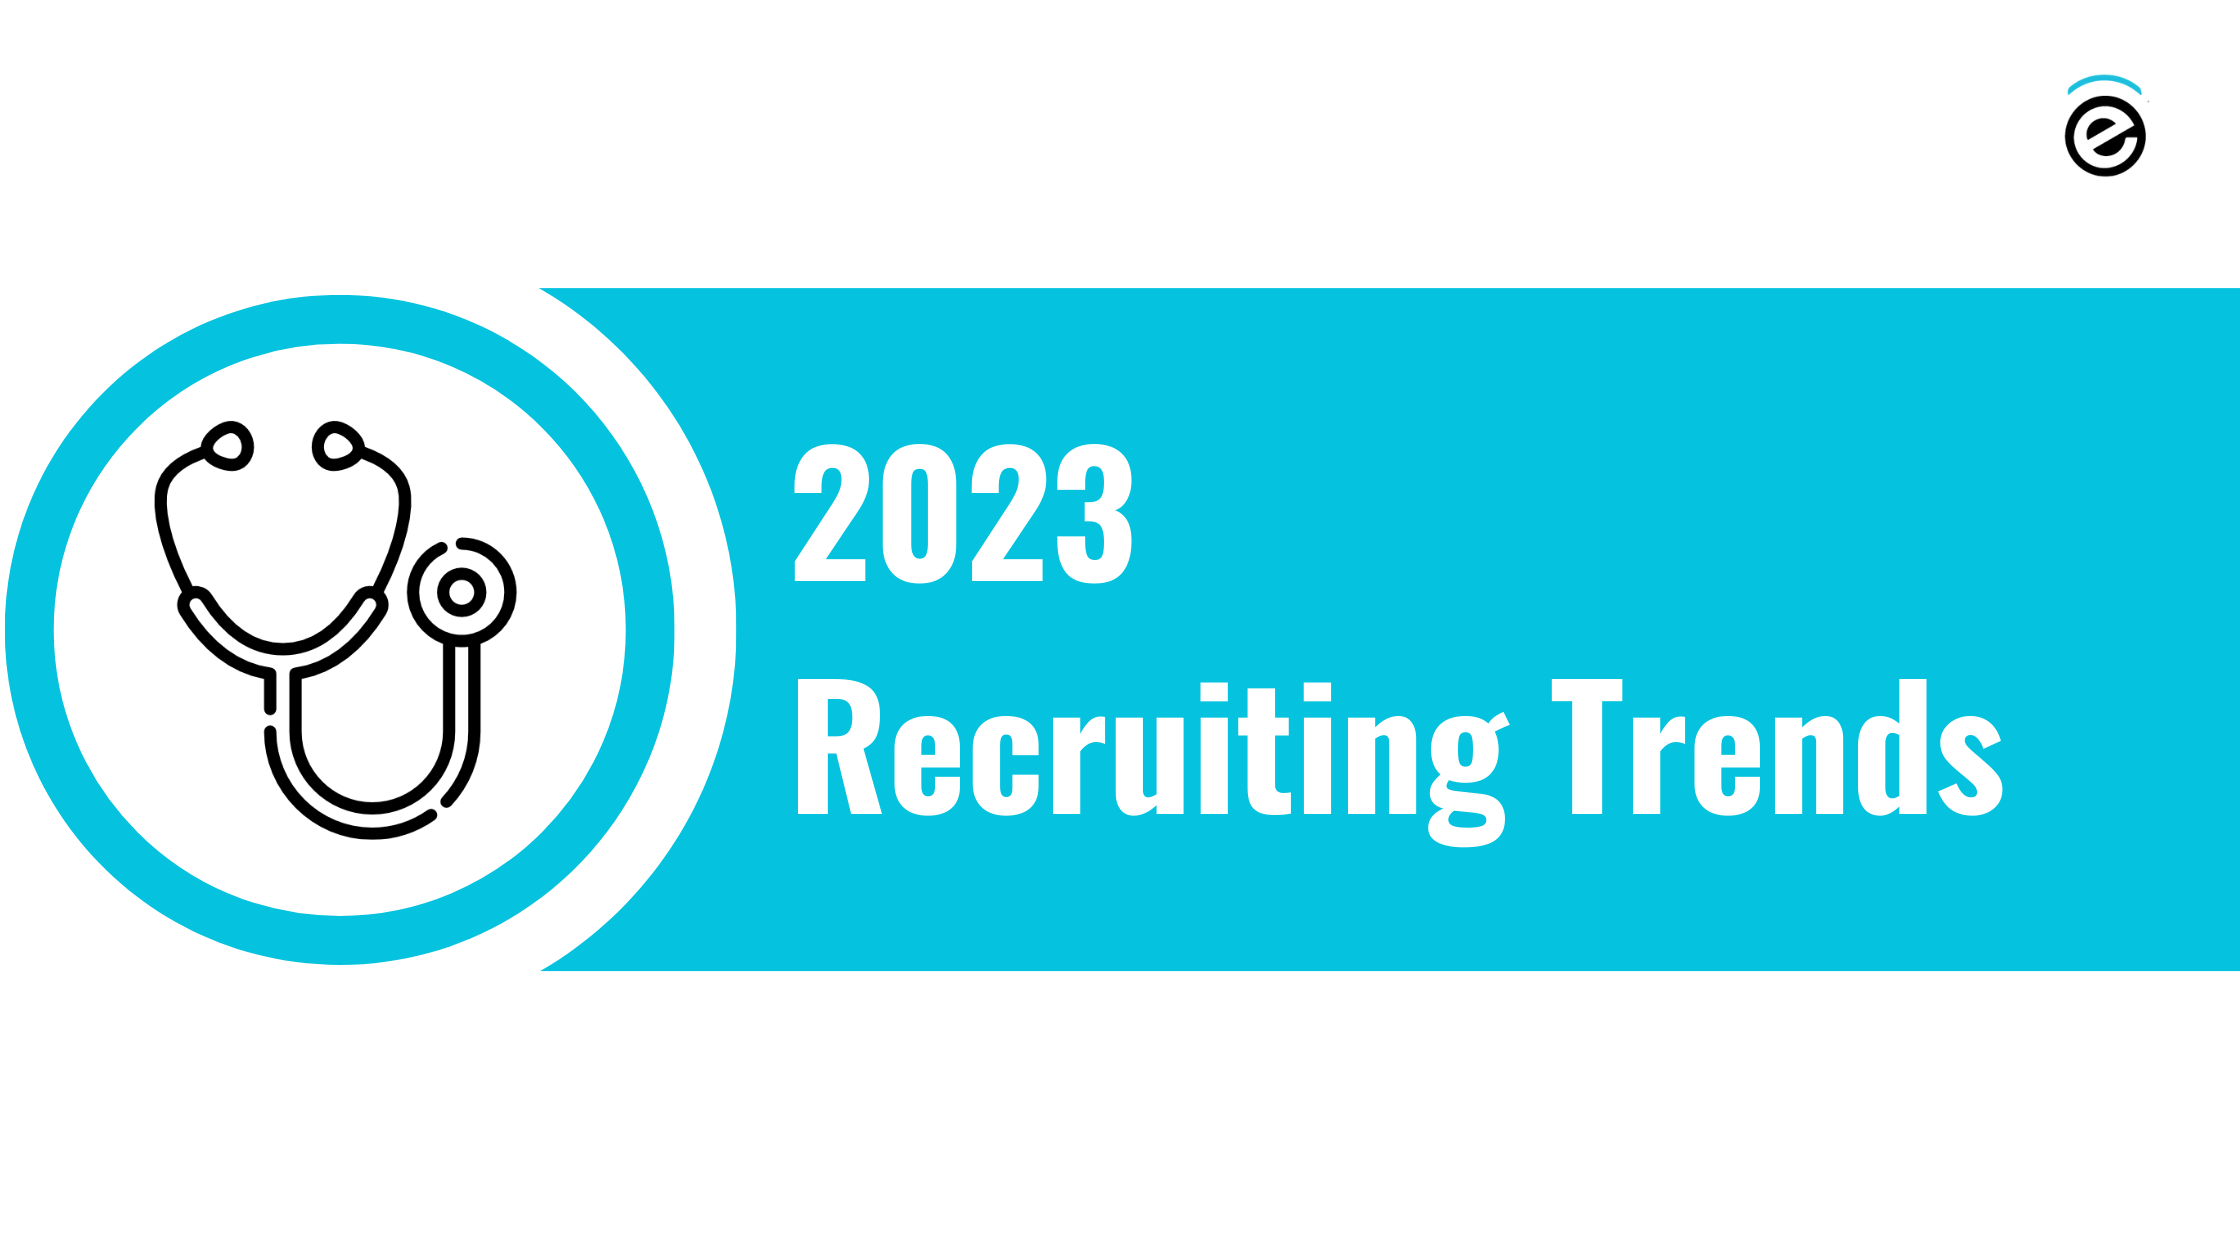 Recruiting Trends to Look Out For in 2023